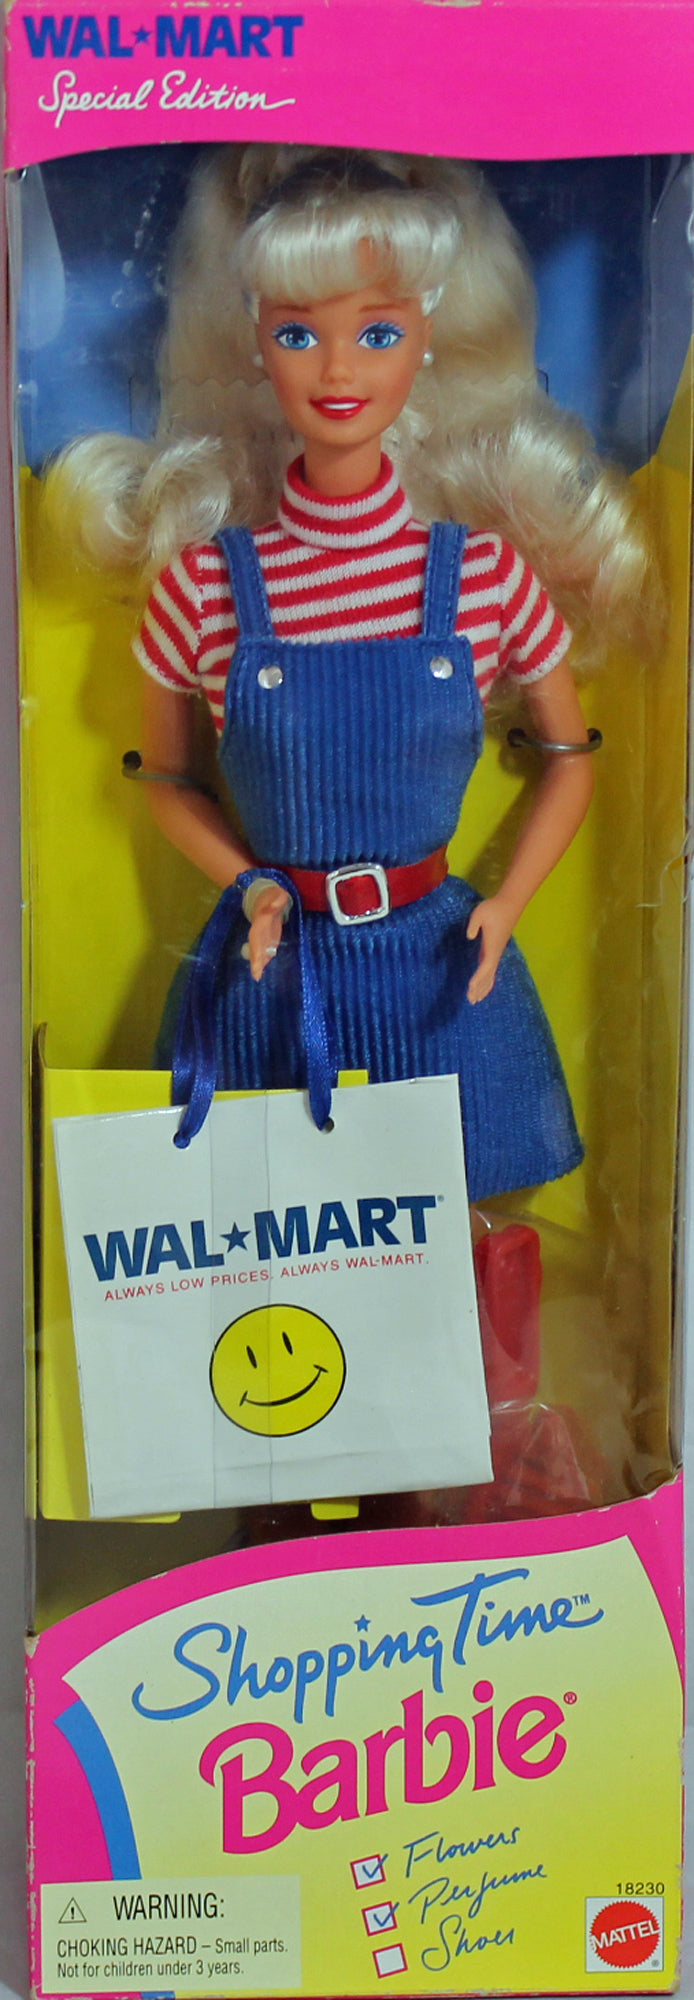 1997 Shopping Time Barbie (18230)